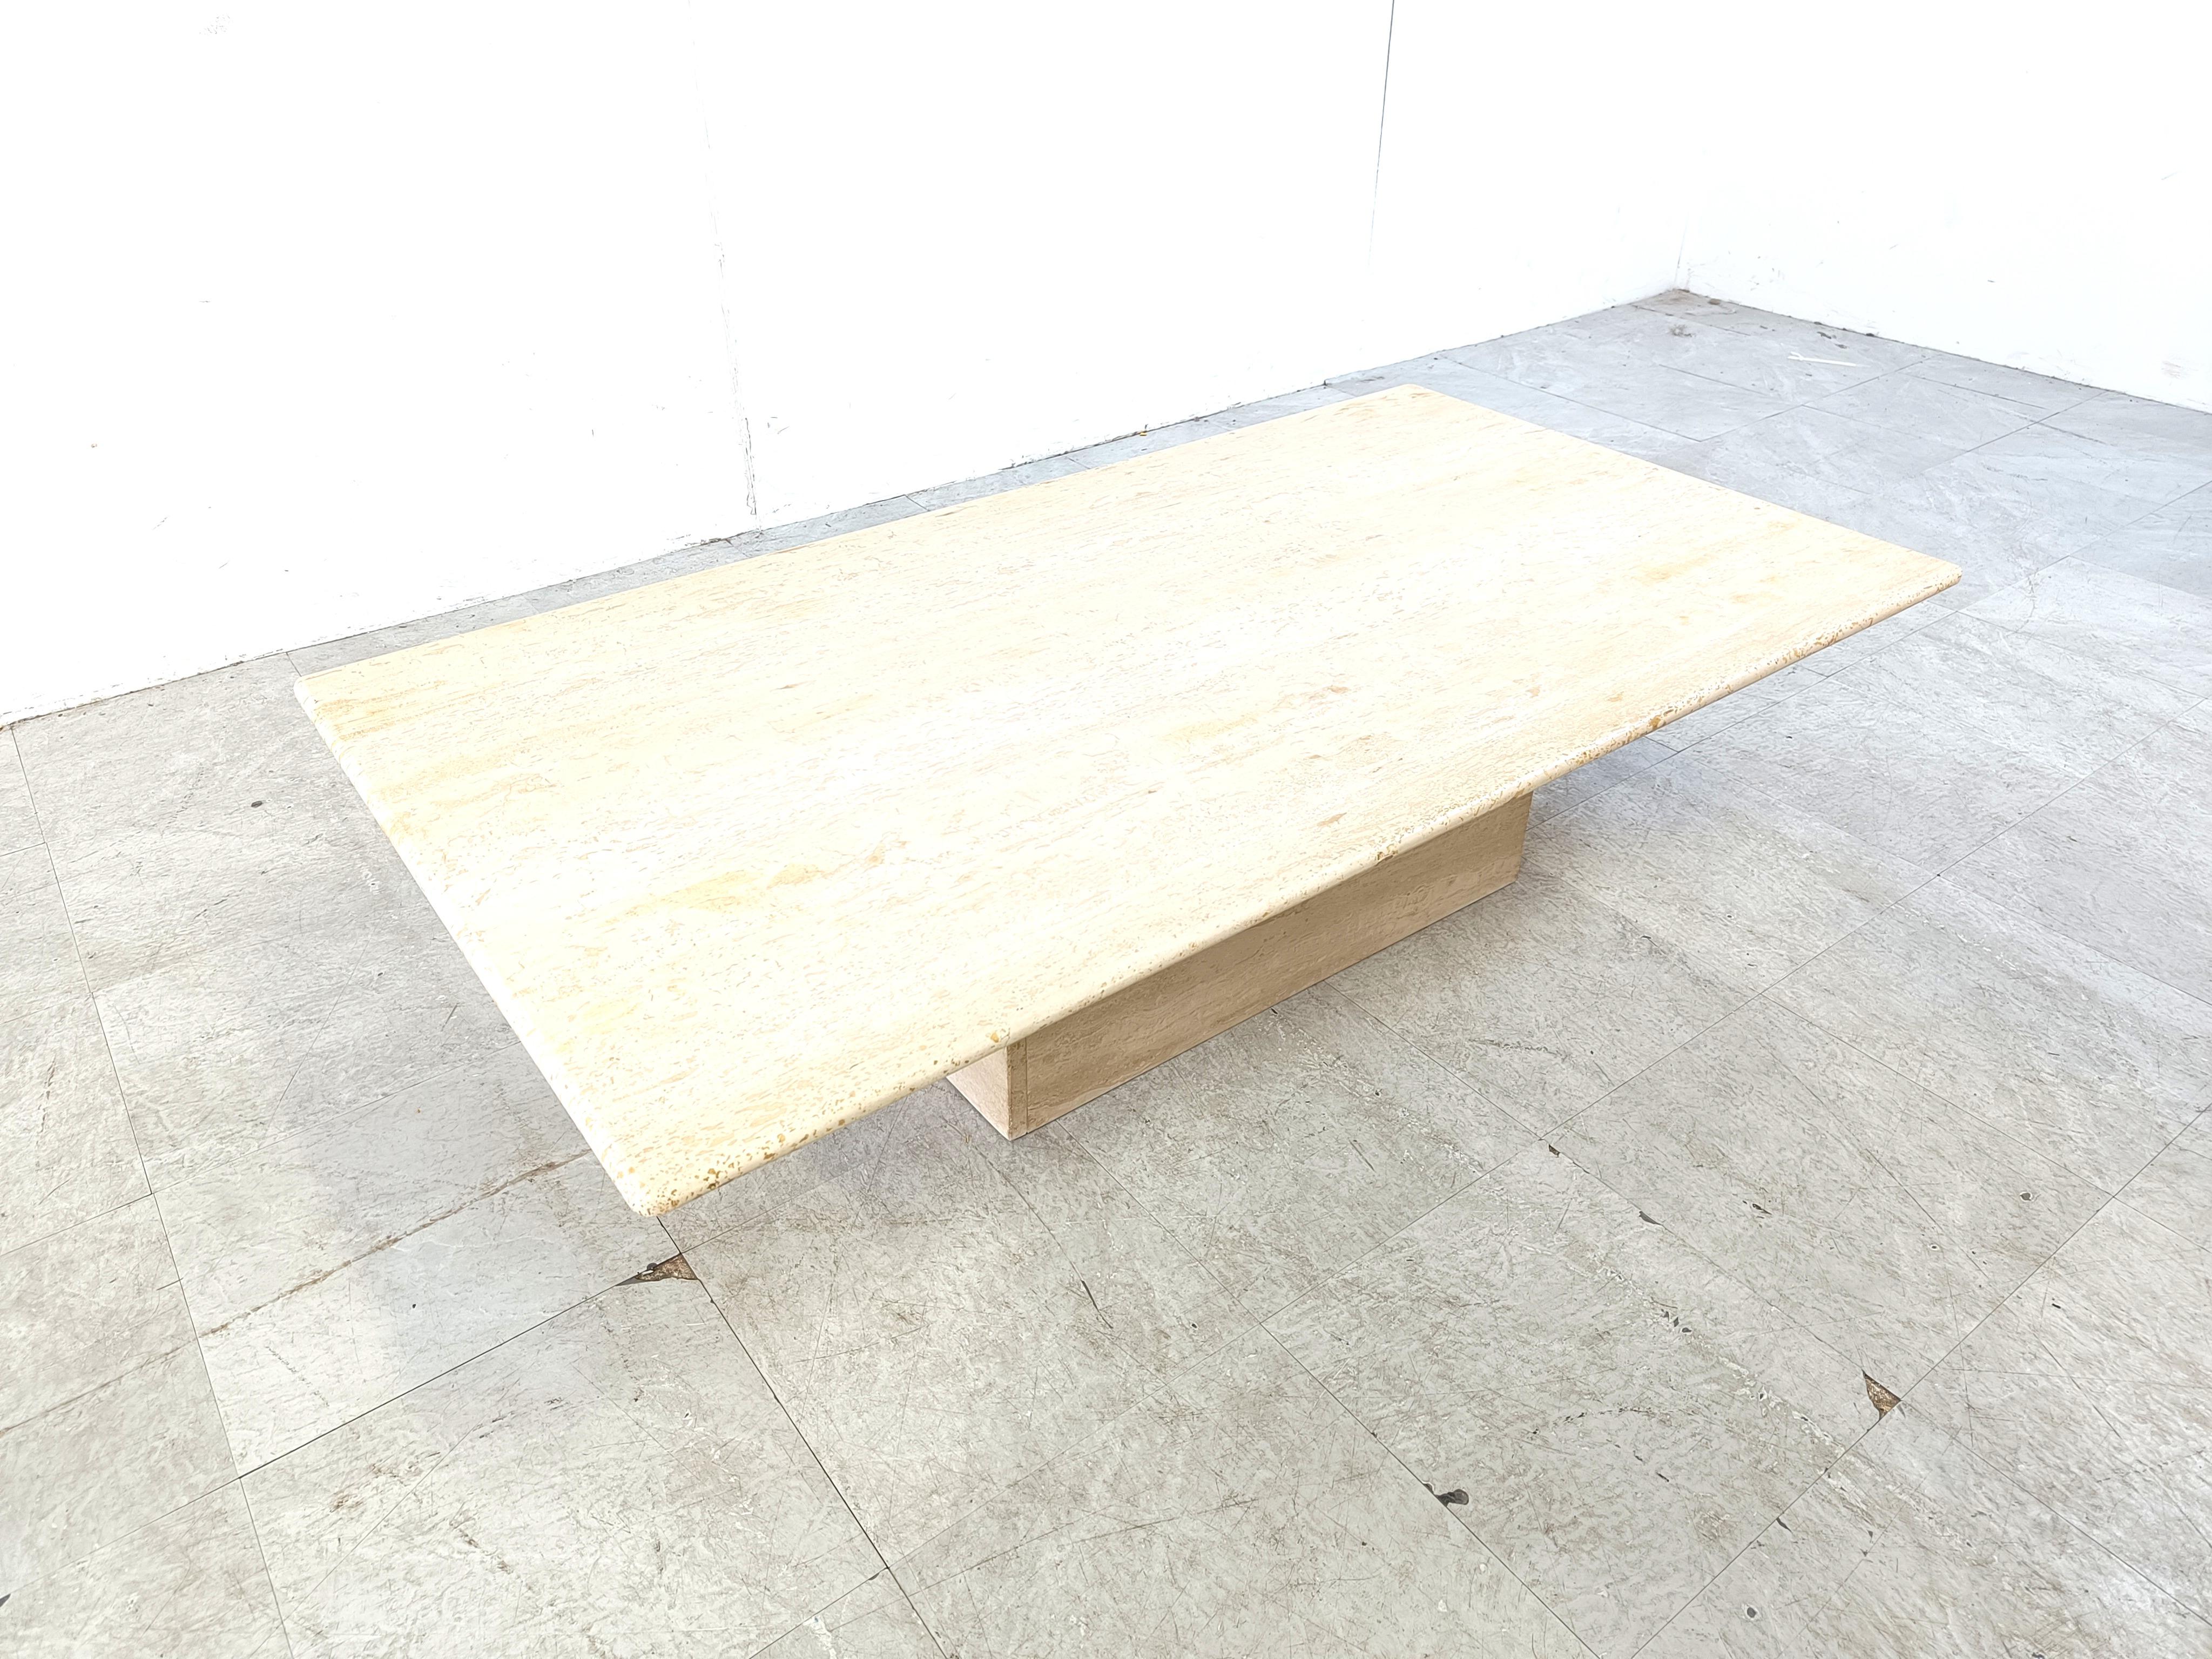 Vintage rectangular travertine coffee table with a central leg.

Beautiful natural travertine stone.

Good condition

1970s - Italy

Height: 35cm/13.77